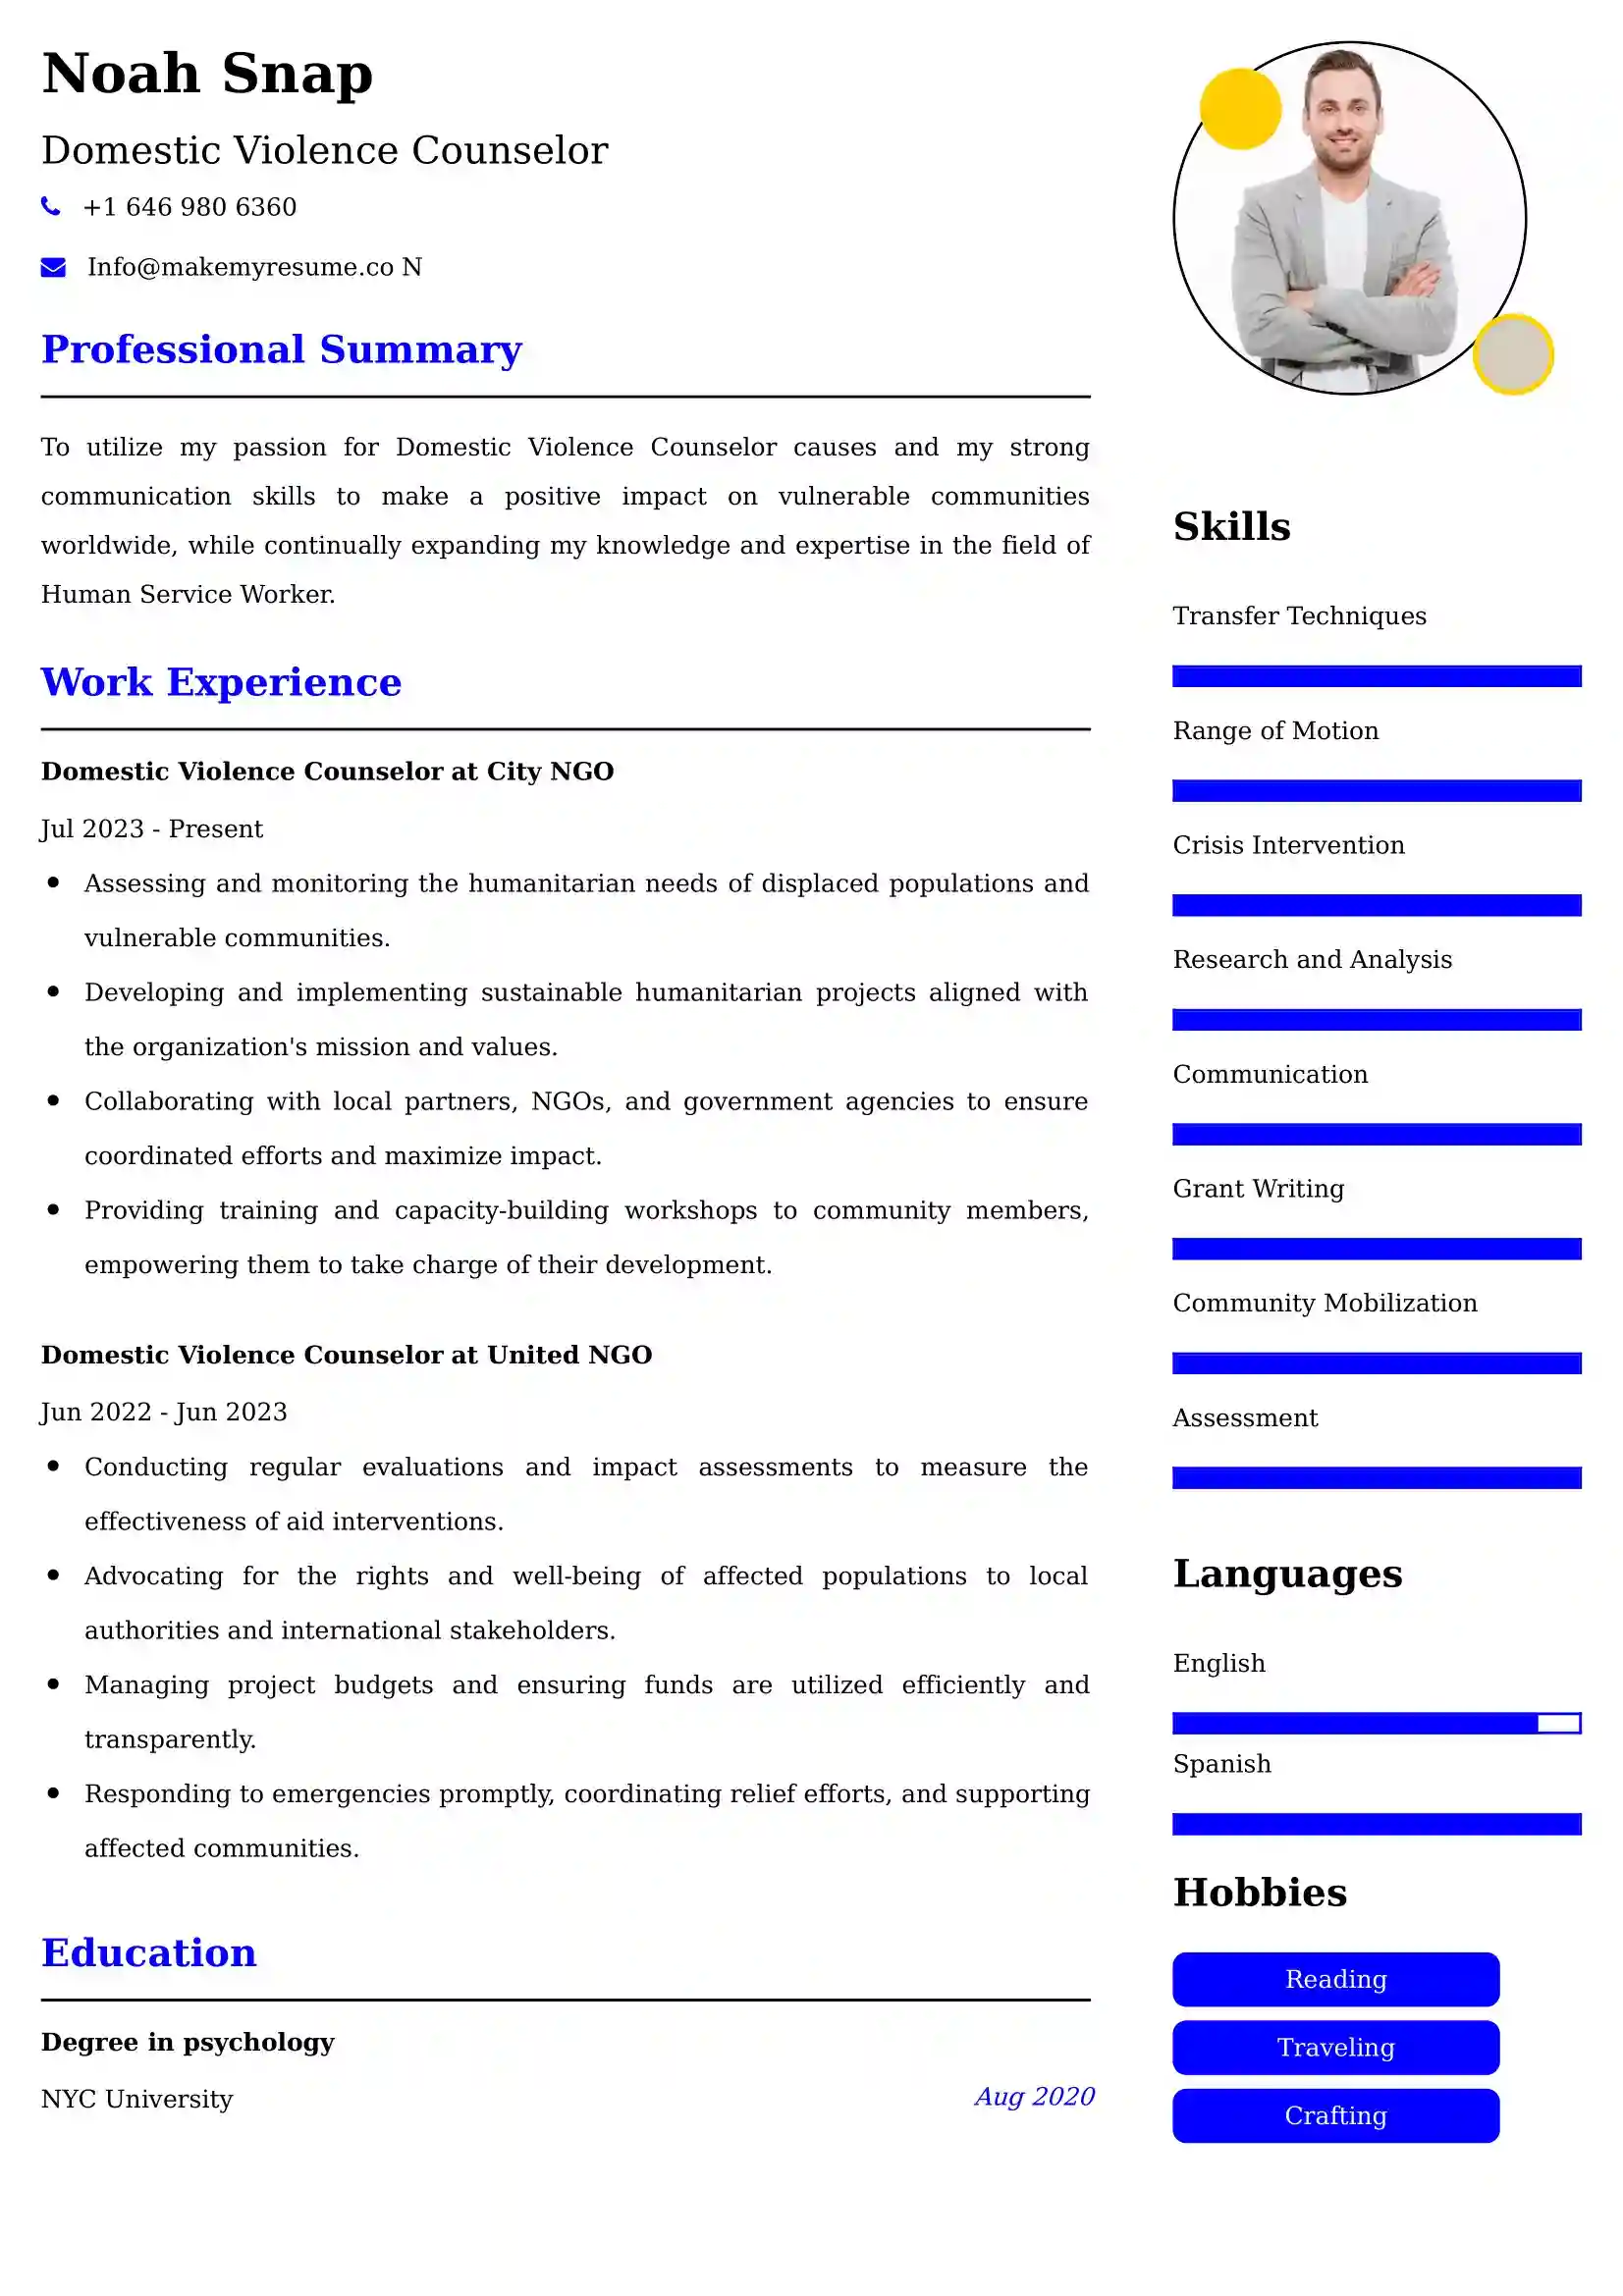 Domestic Violence Counselor Resume Examples for UK Jobs - Tips and Guide